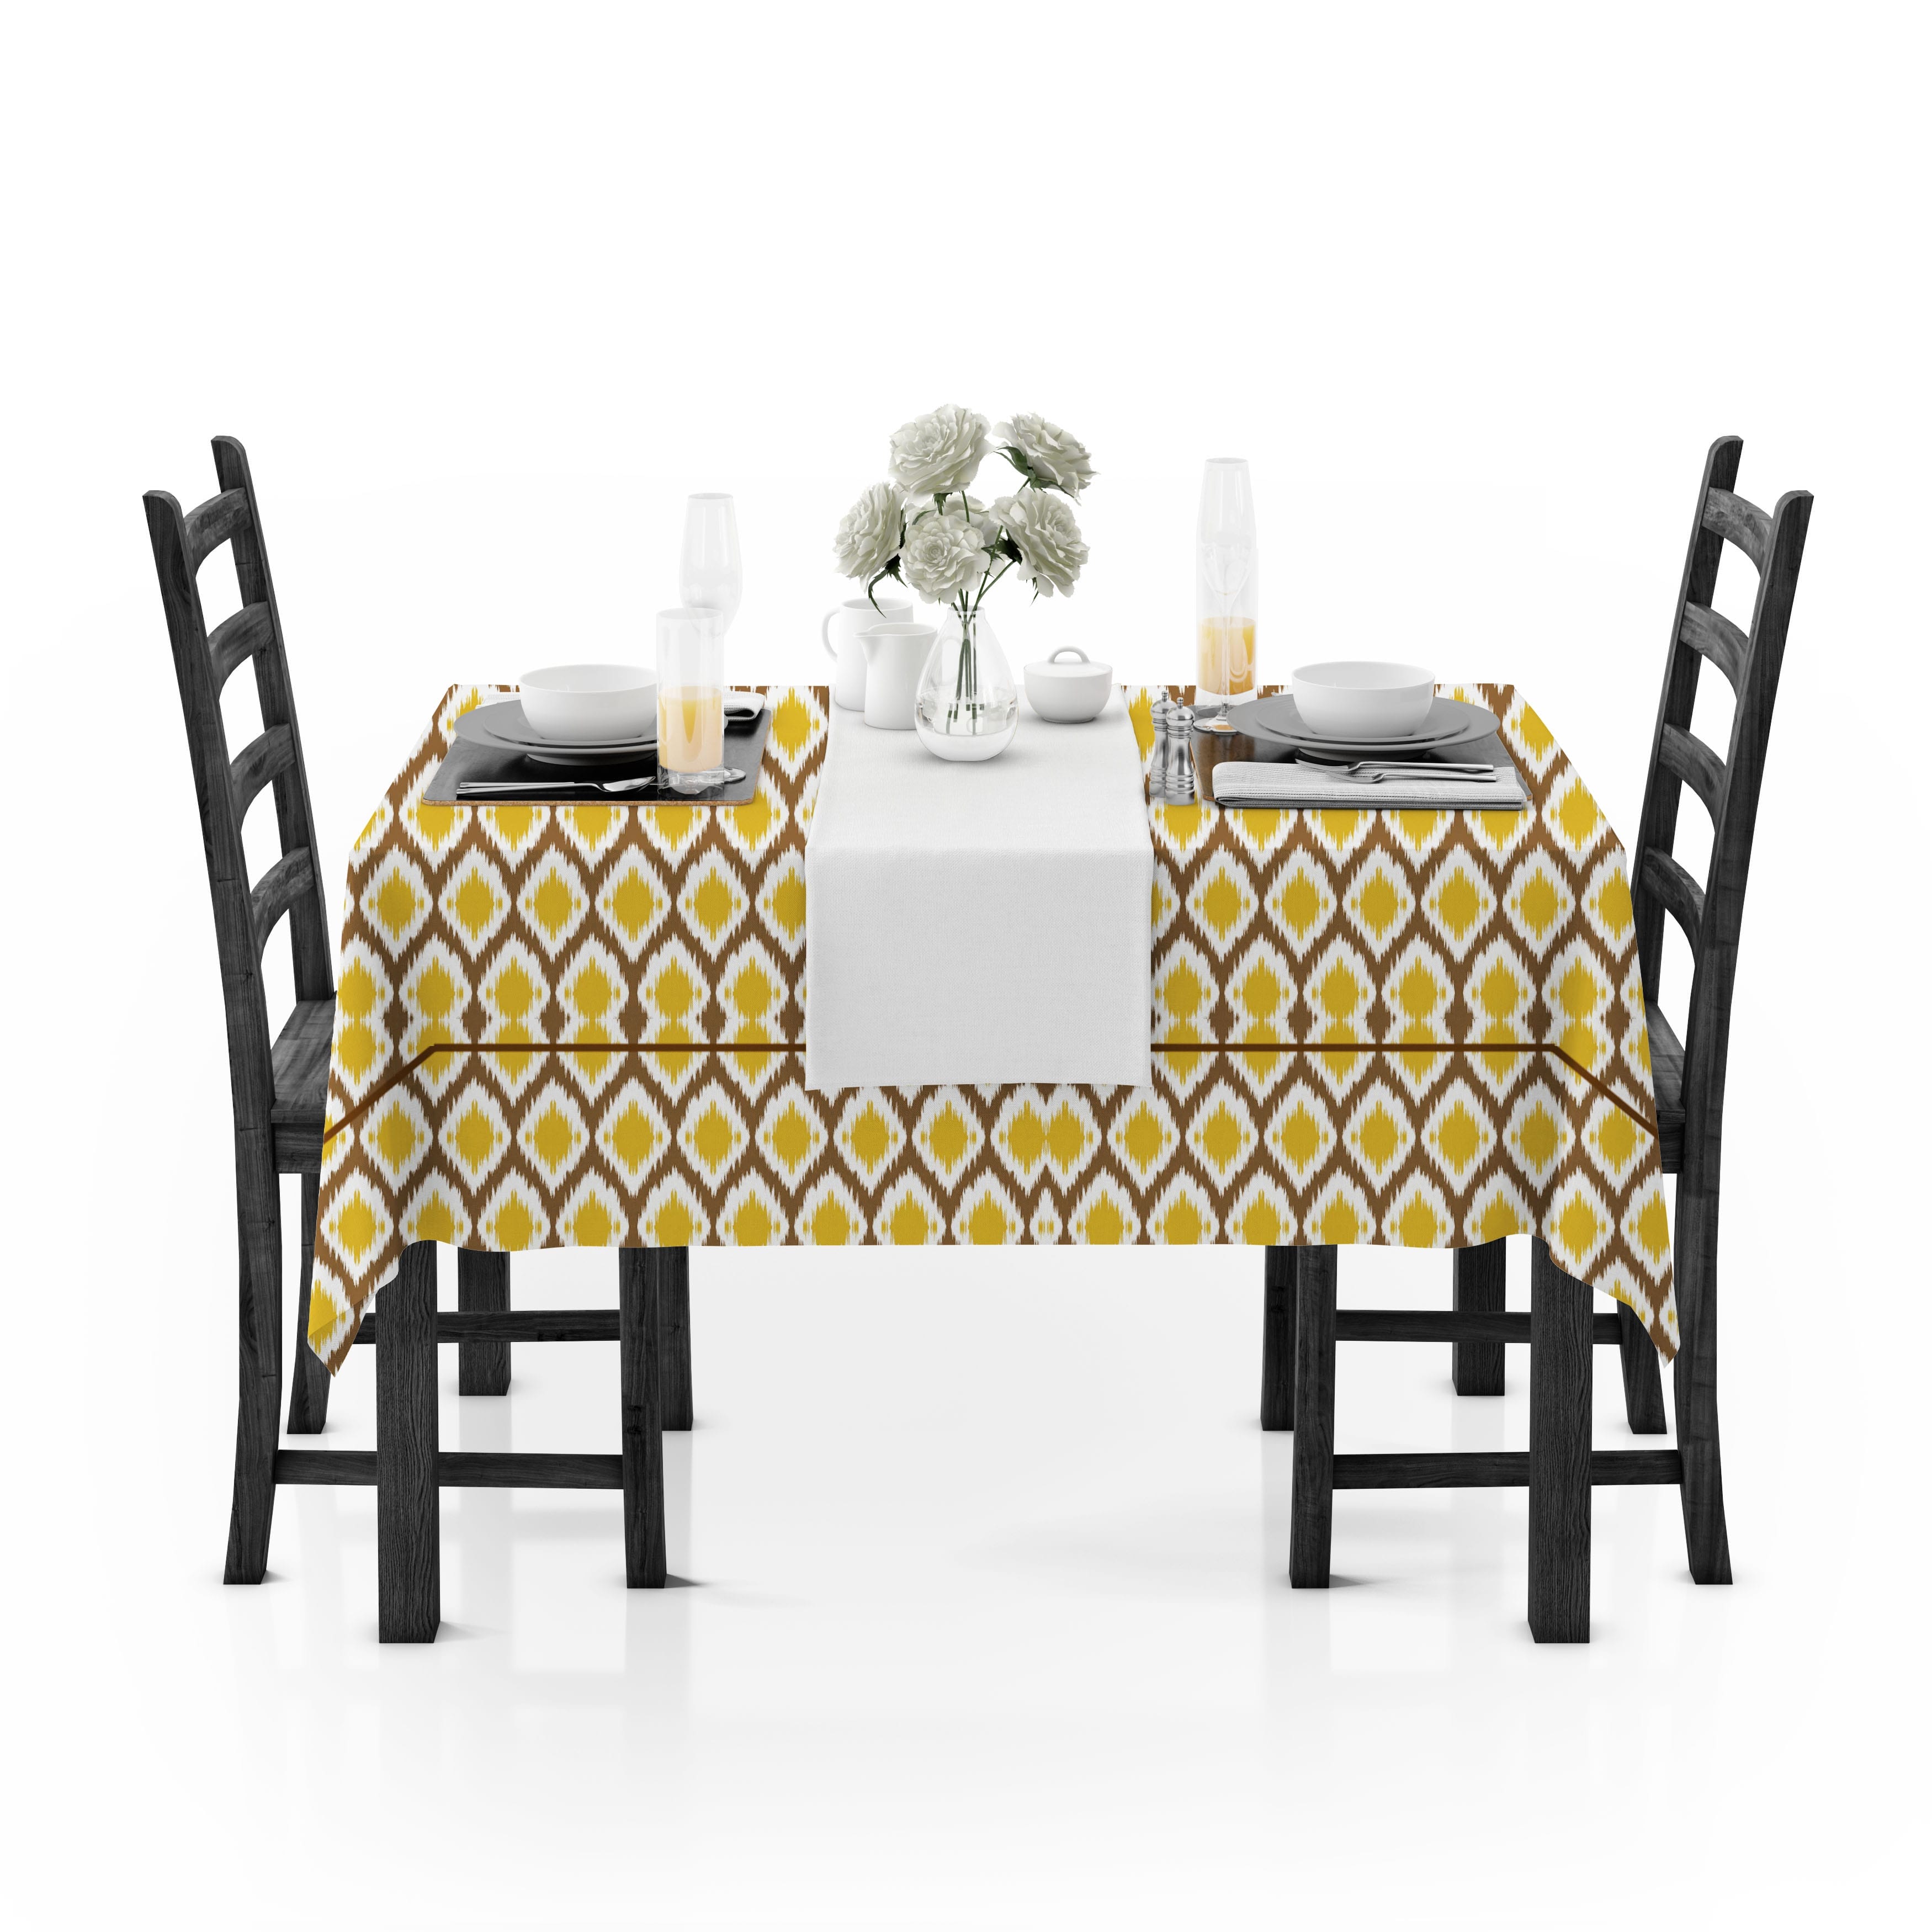 Prism Mustard Printed Cotton Damask Table Cover(1 Pc) online in India